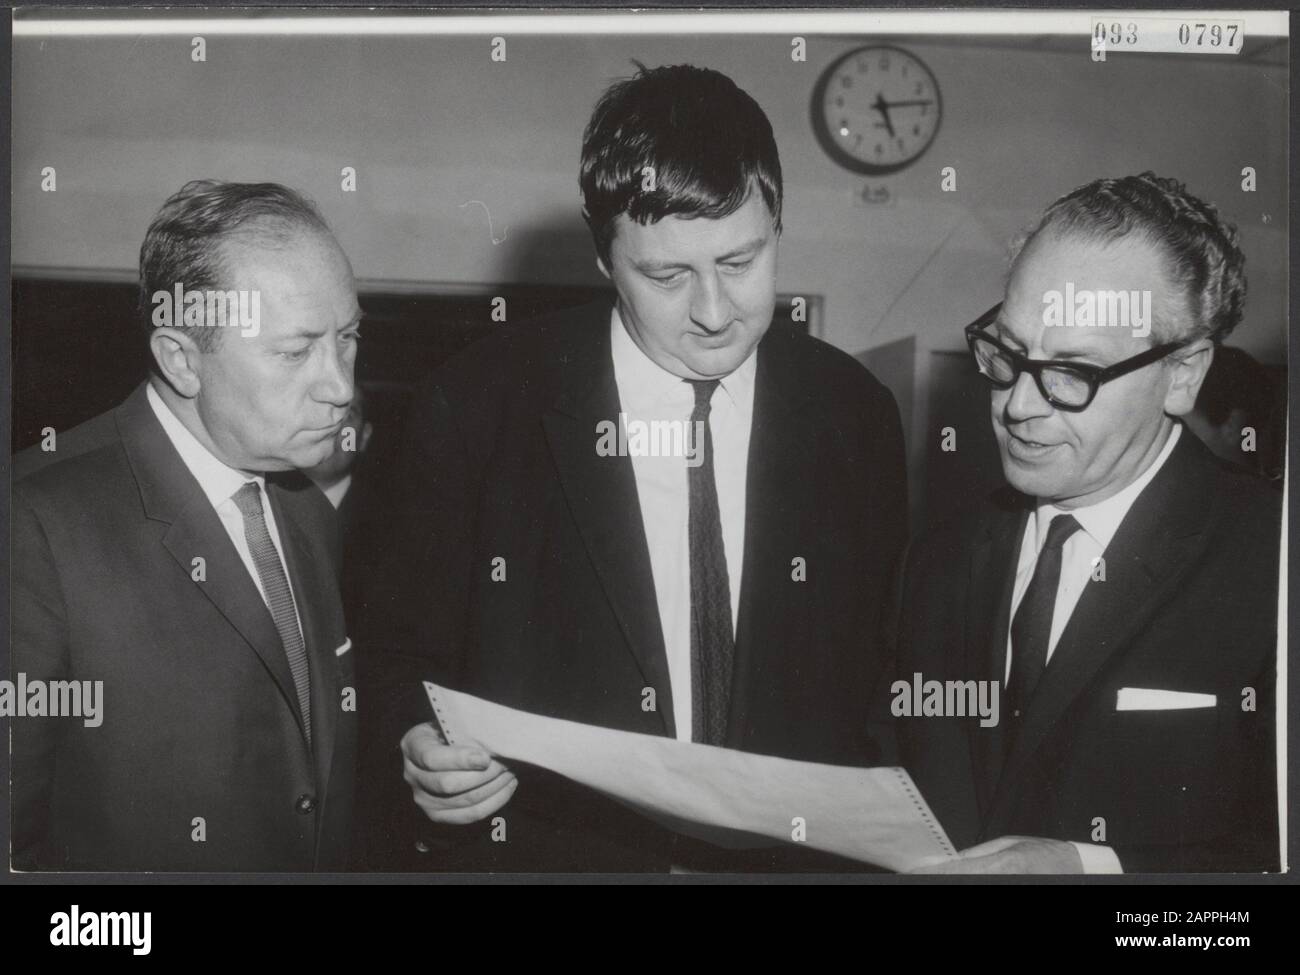 Minister M. Vrolijk opens the 5th IBM master tournament. After the minister had activated the computer, which made the draw, he looks with the grandmasters Laszlo Szabo (left) and Jan Hein Donner the result Date: 19 July 1965 Location: Amsterdam, Noord-Holland Keywords: ministers, openings, chess, competitions Personal name: Donner, Jan Hein, Szabo, Laszlo, Vrolijk, M. Stock Photo